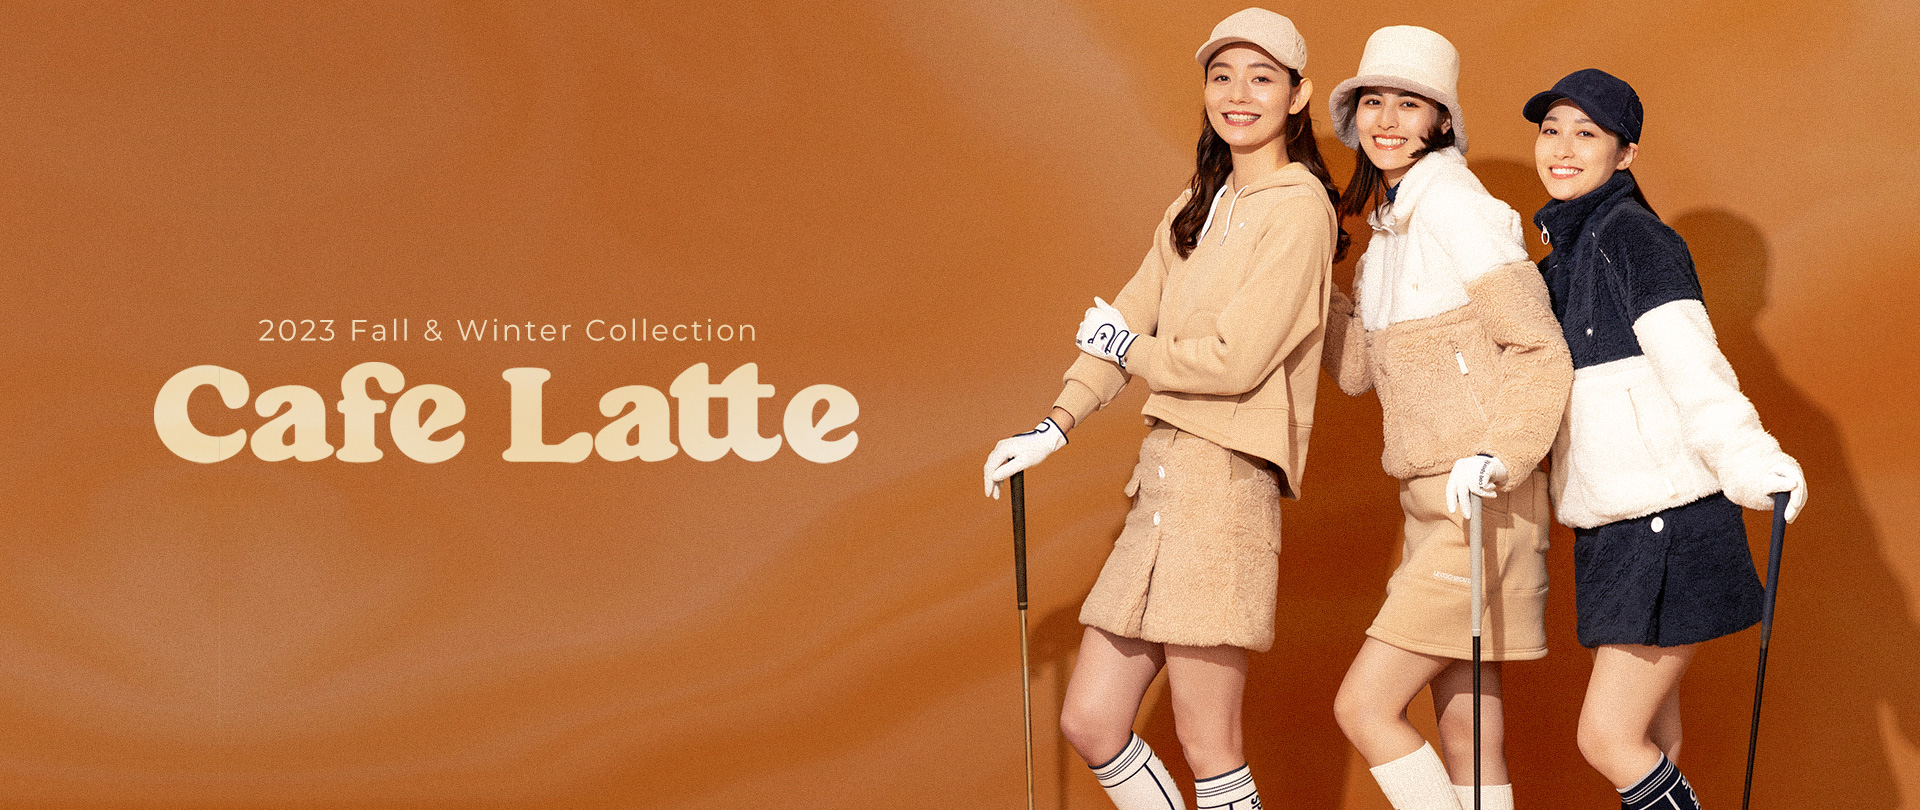 2023 Fall & Winter Collection Cafe Latte